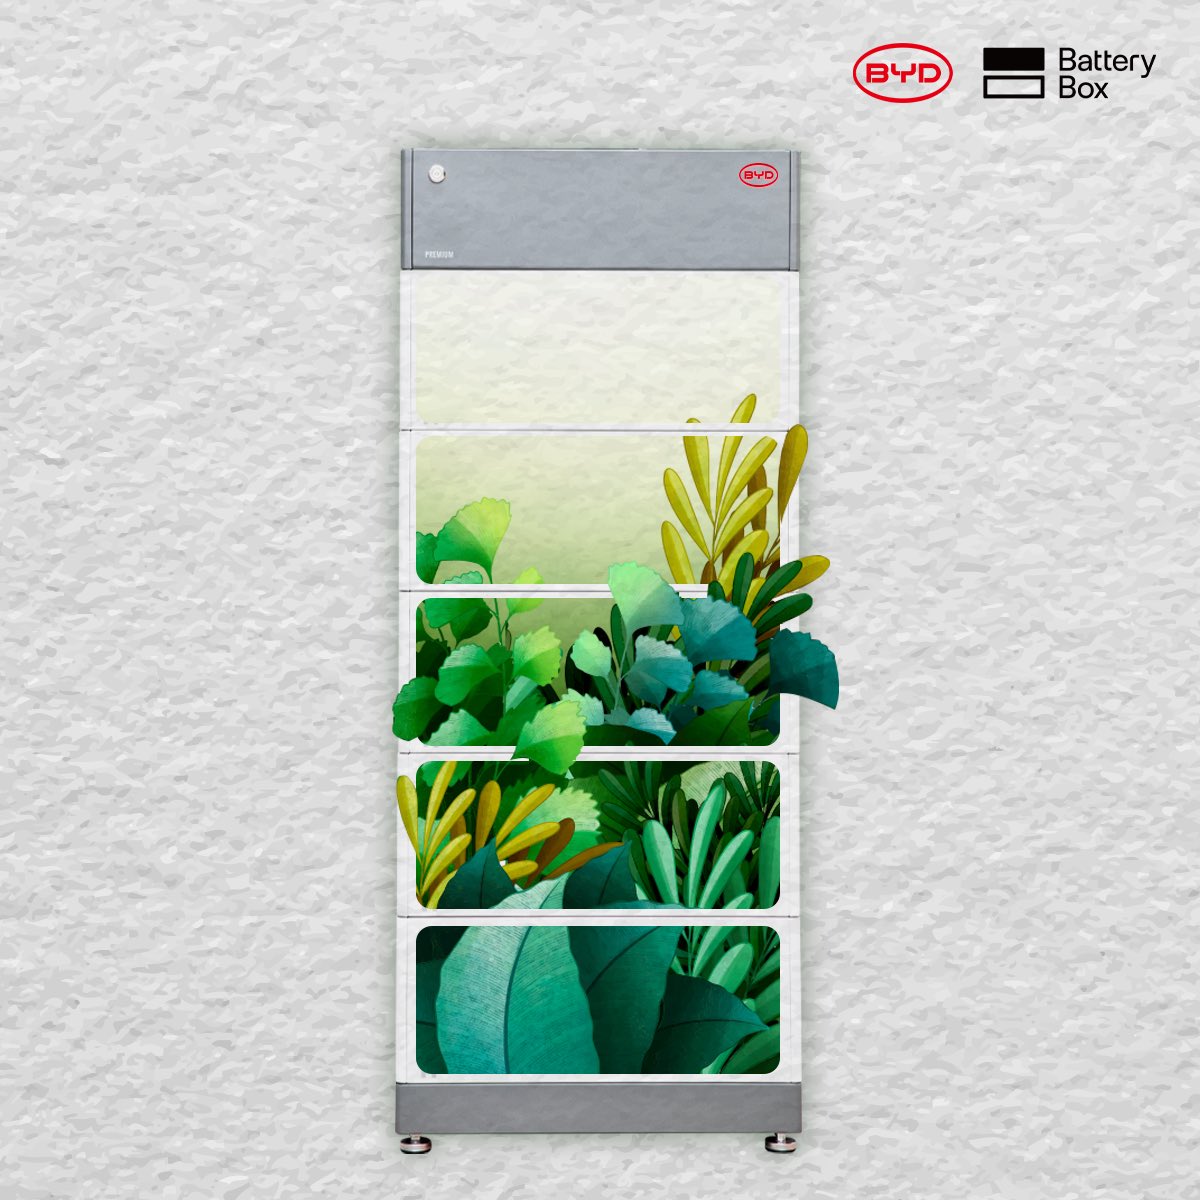 Flexible grid ready for sprouting sustainability.

#BYD #BuildYourDreams #BYDBatteryBox